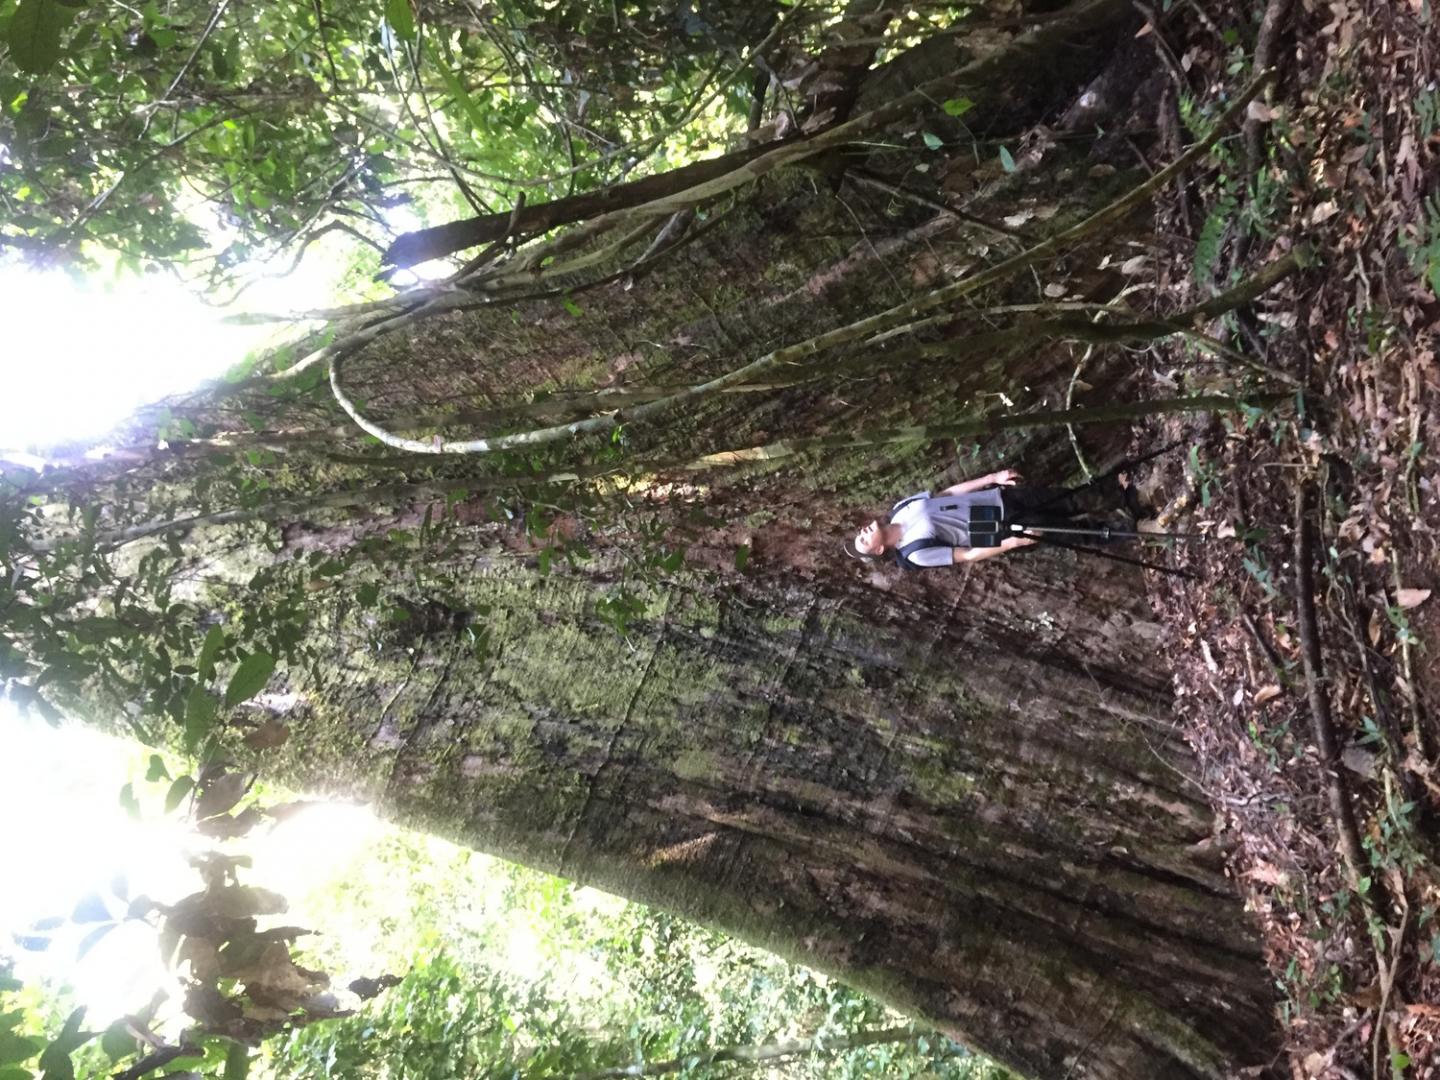 Enormous tree, several metres wide at base, reaches up to sky, man in front of it